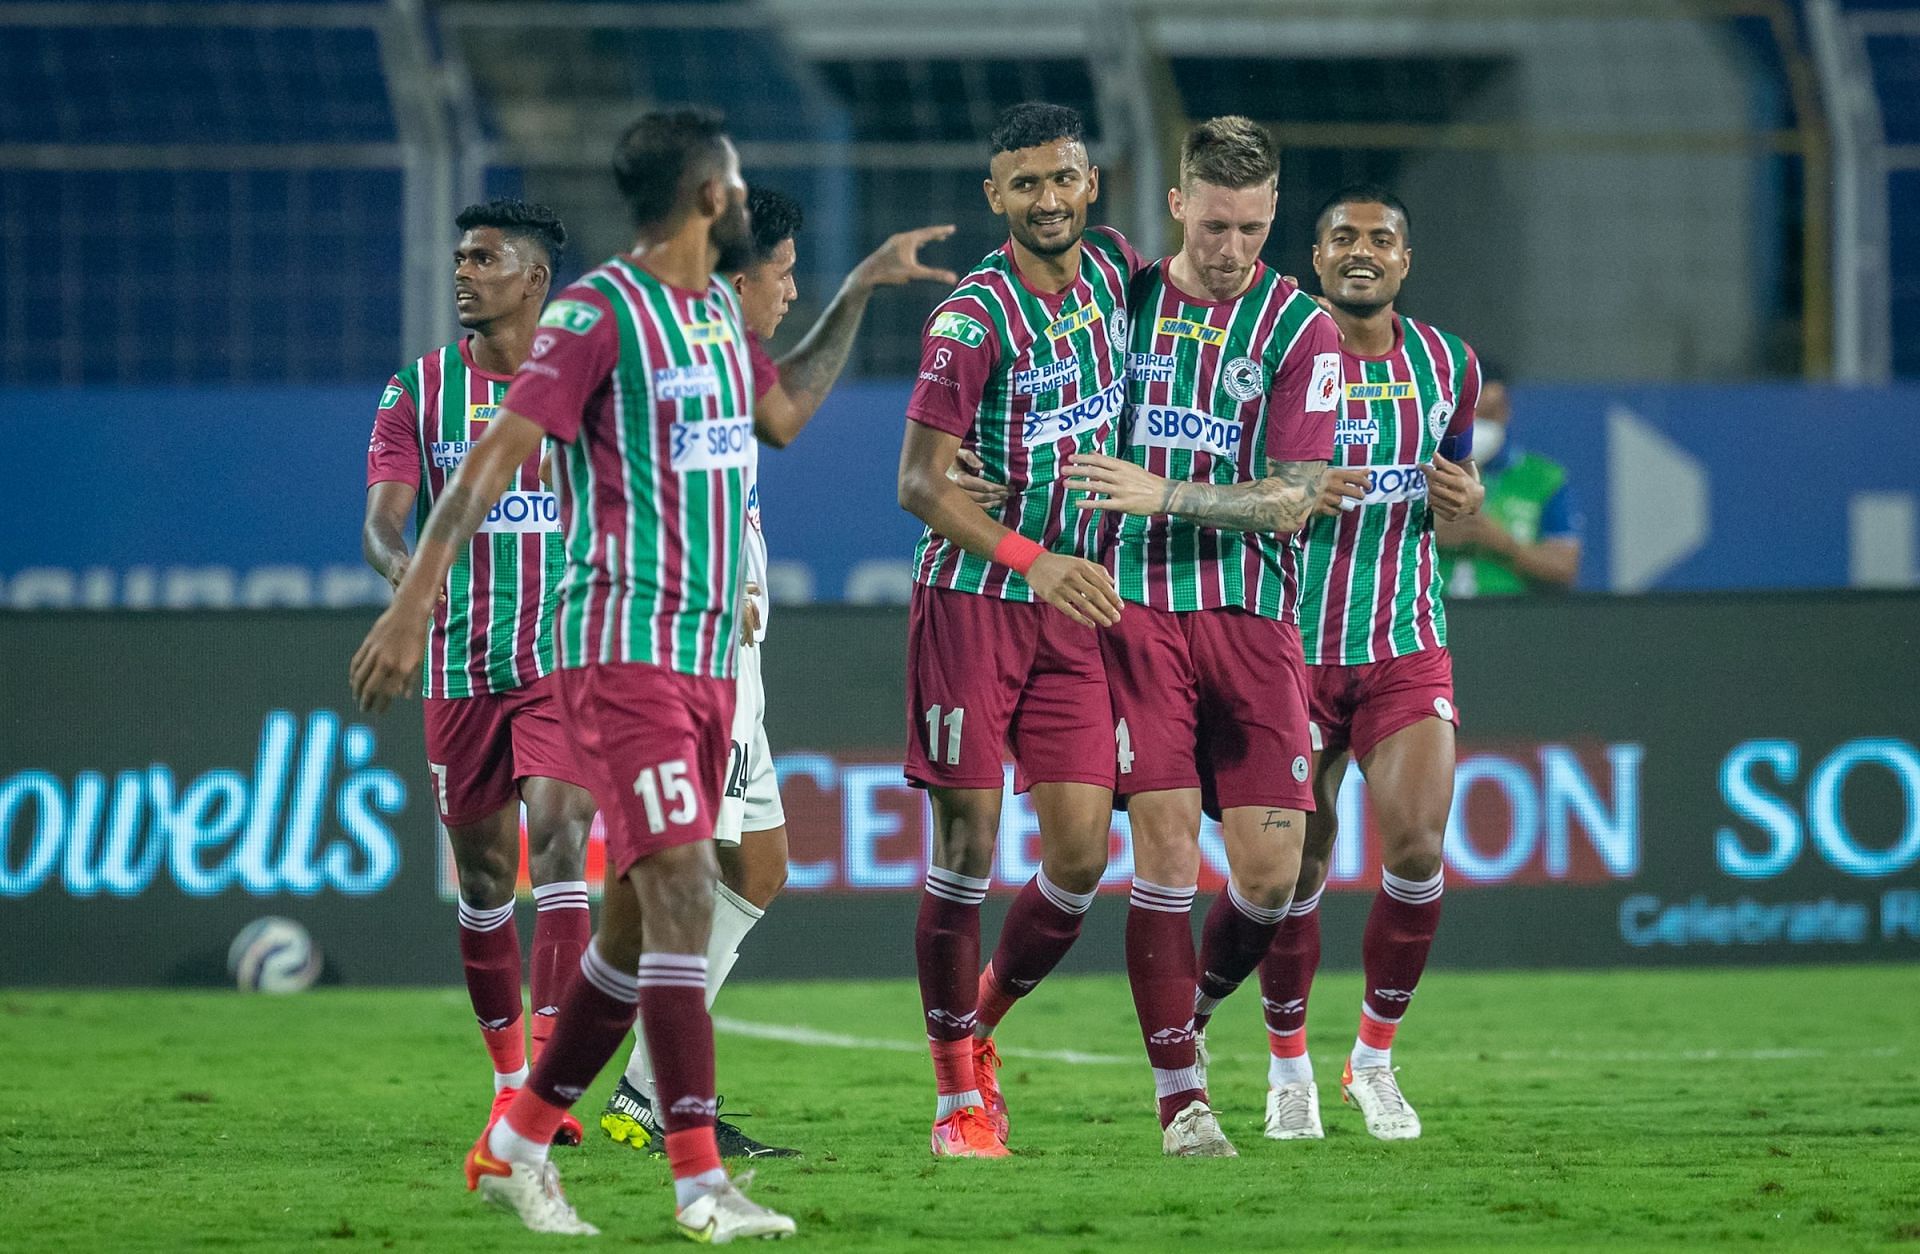 ATK Mohun Bagan will need to win their remaining games to have a shot at the ISL Shield (Image Courtesy: ISL)